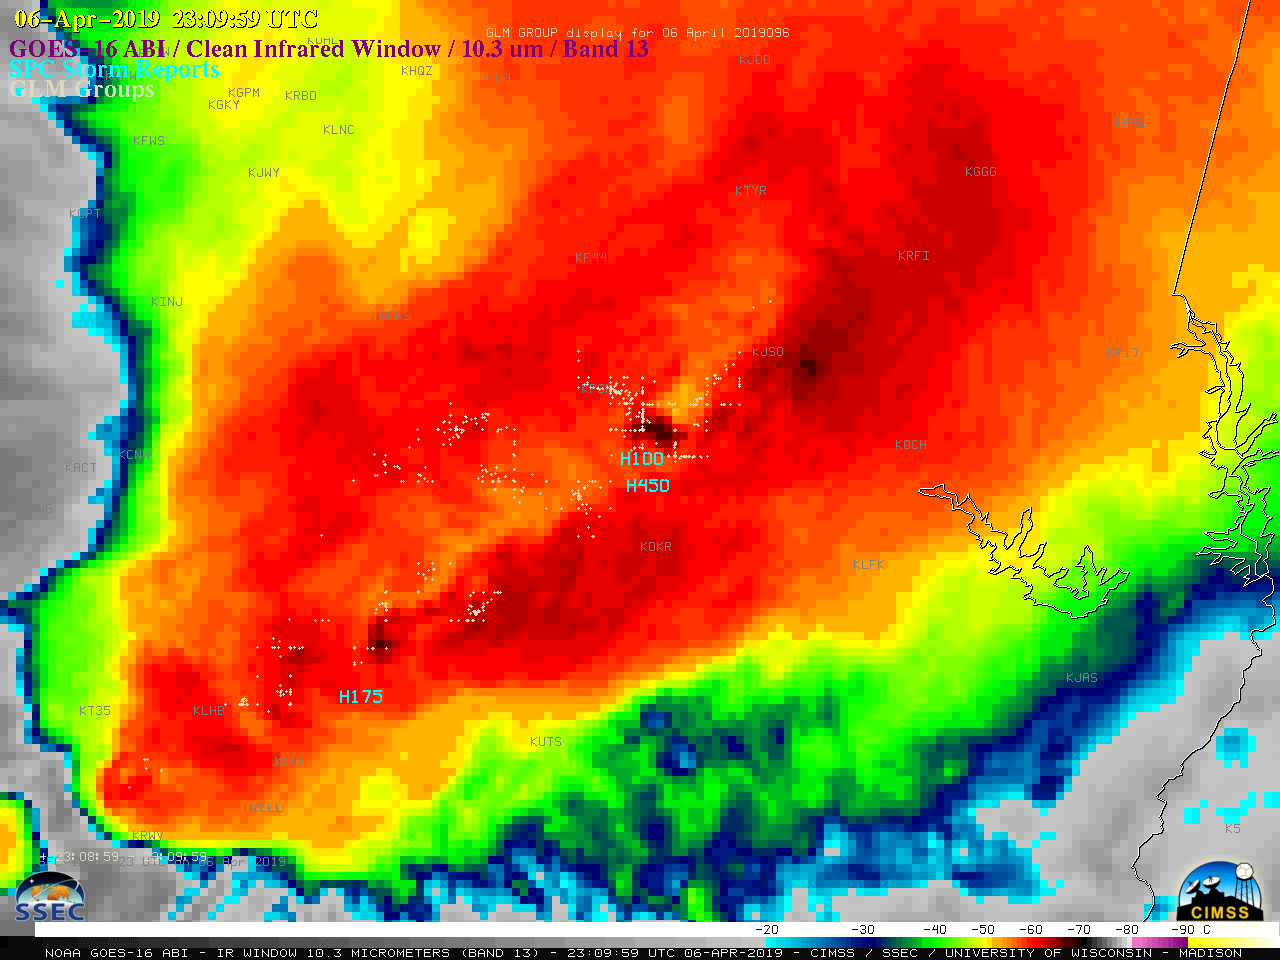 GOES-16 "Clean" Infrared Window (10.3 µm) images, with GLM Groups plotted in beige and SPC storm reports plotted in cyan [click to play animation | MP4]